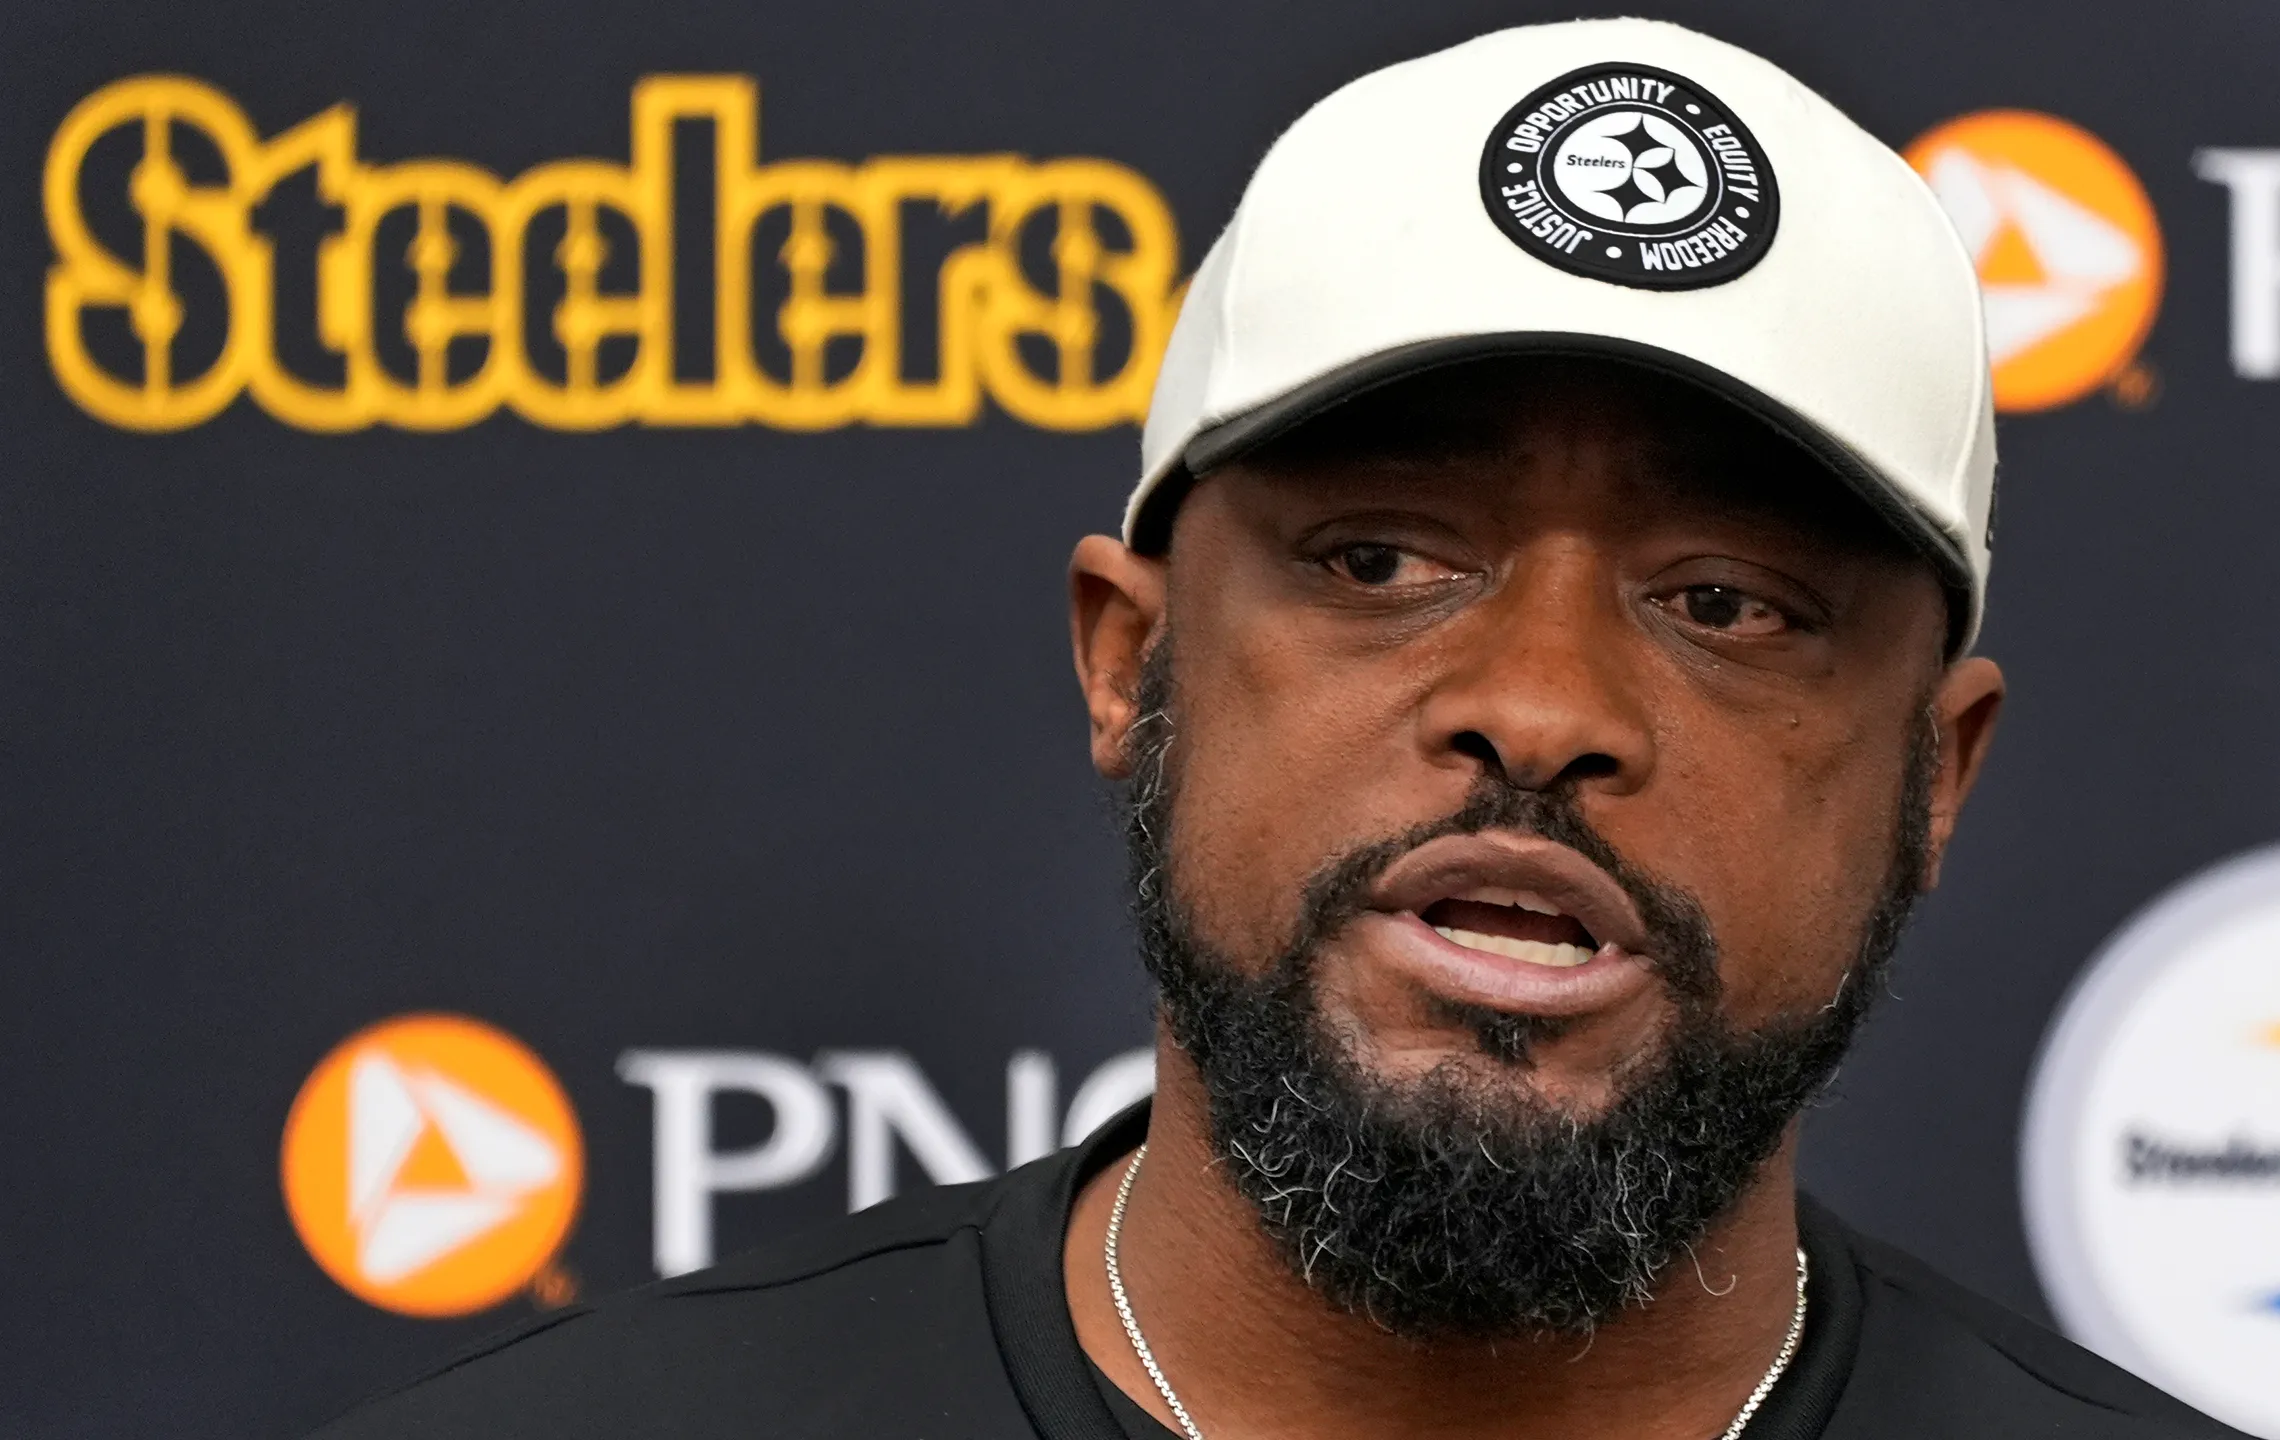 Mike Tomlin's Bold Moves: Will They Revive the Steelers or Extend the Drought?